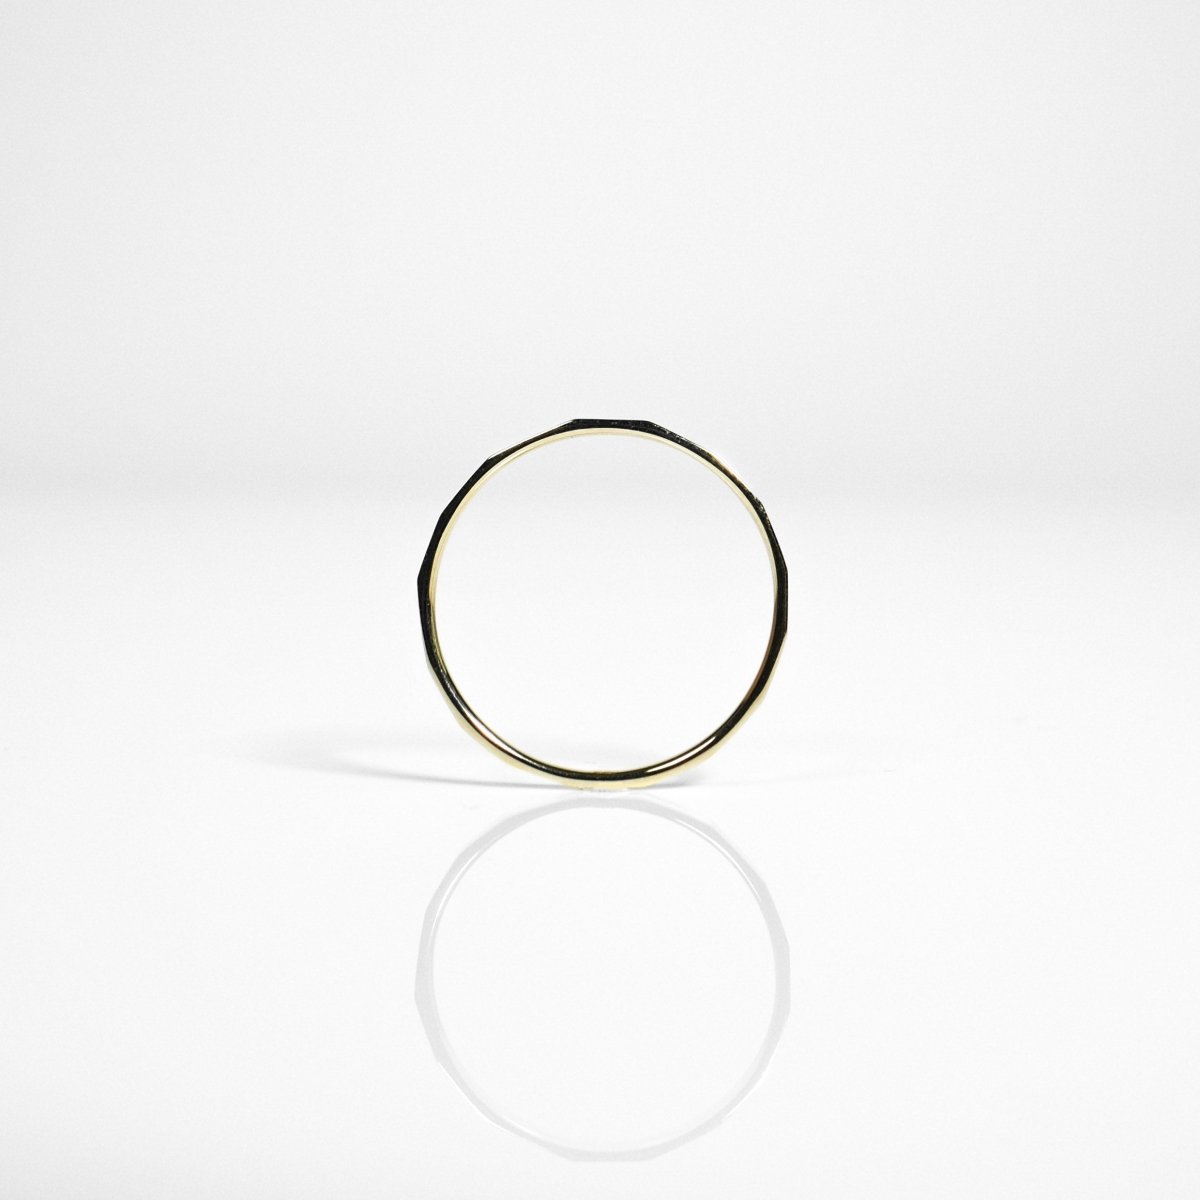 14k Fine Hammered Ring - aucentic